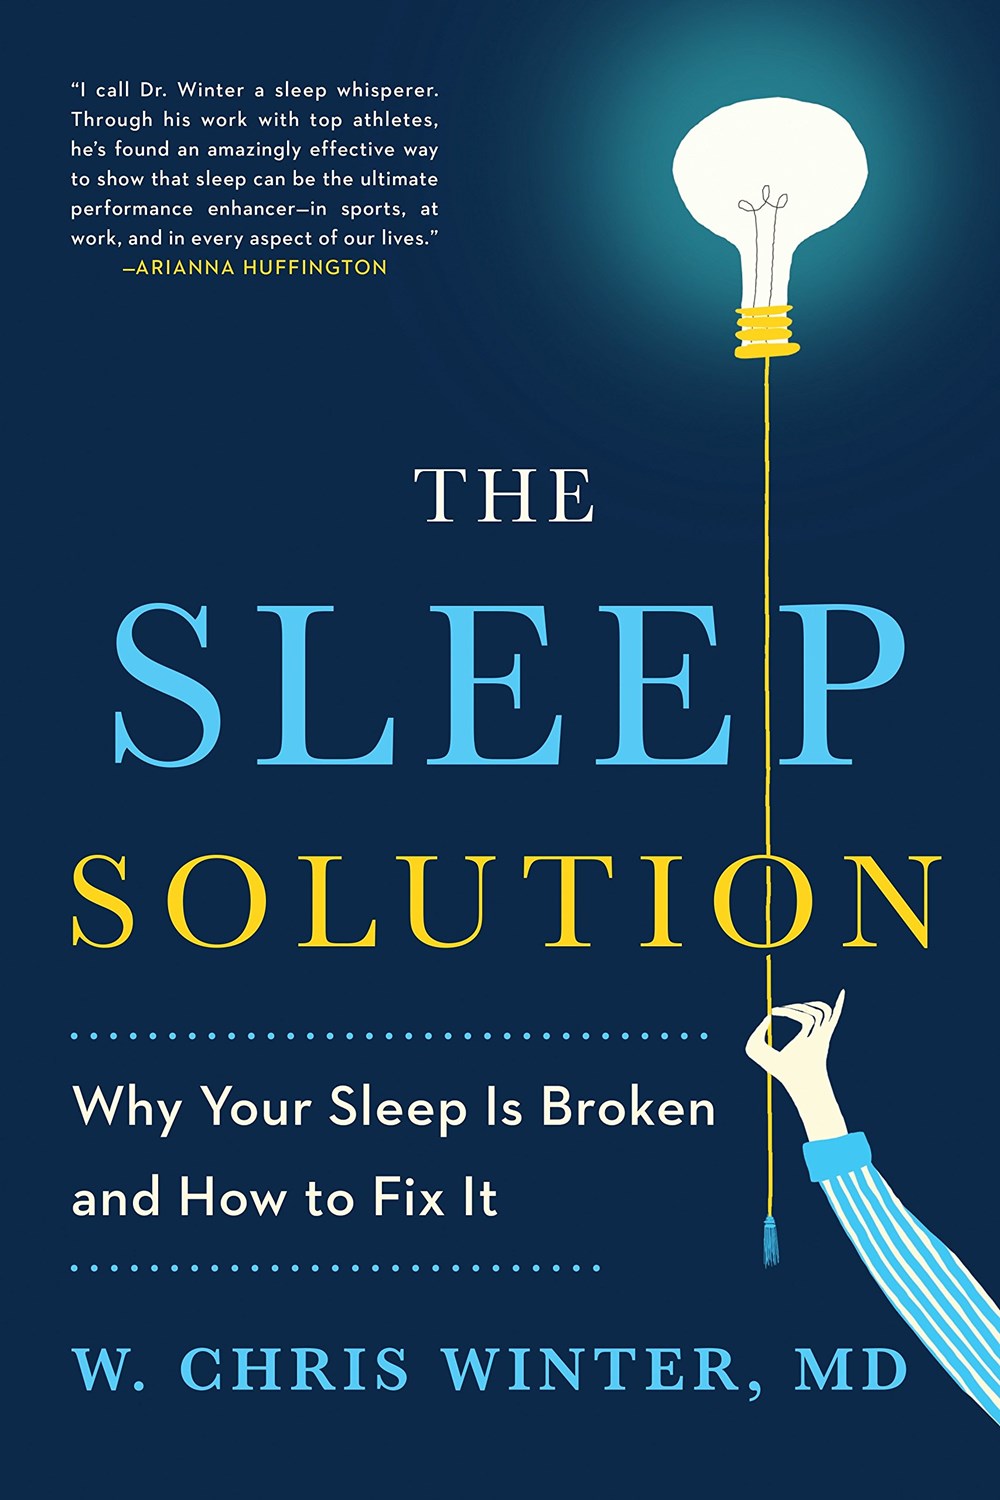 Sleep Solution Why Your Sleep Is Broken and How to Fix It